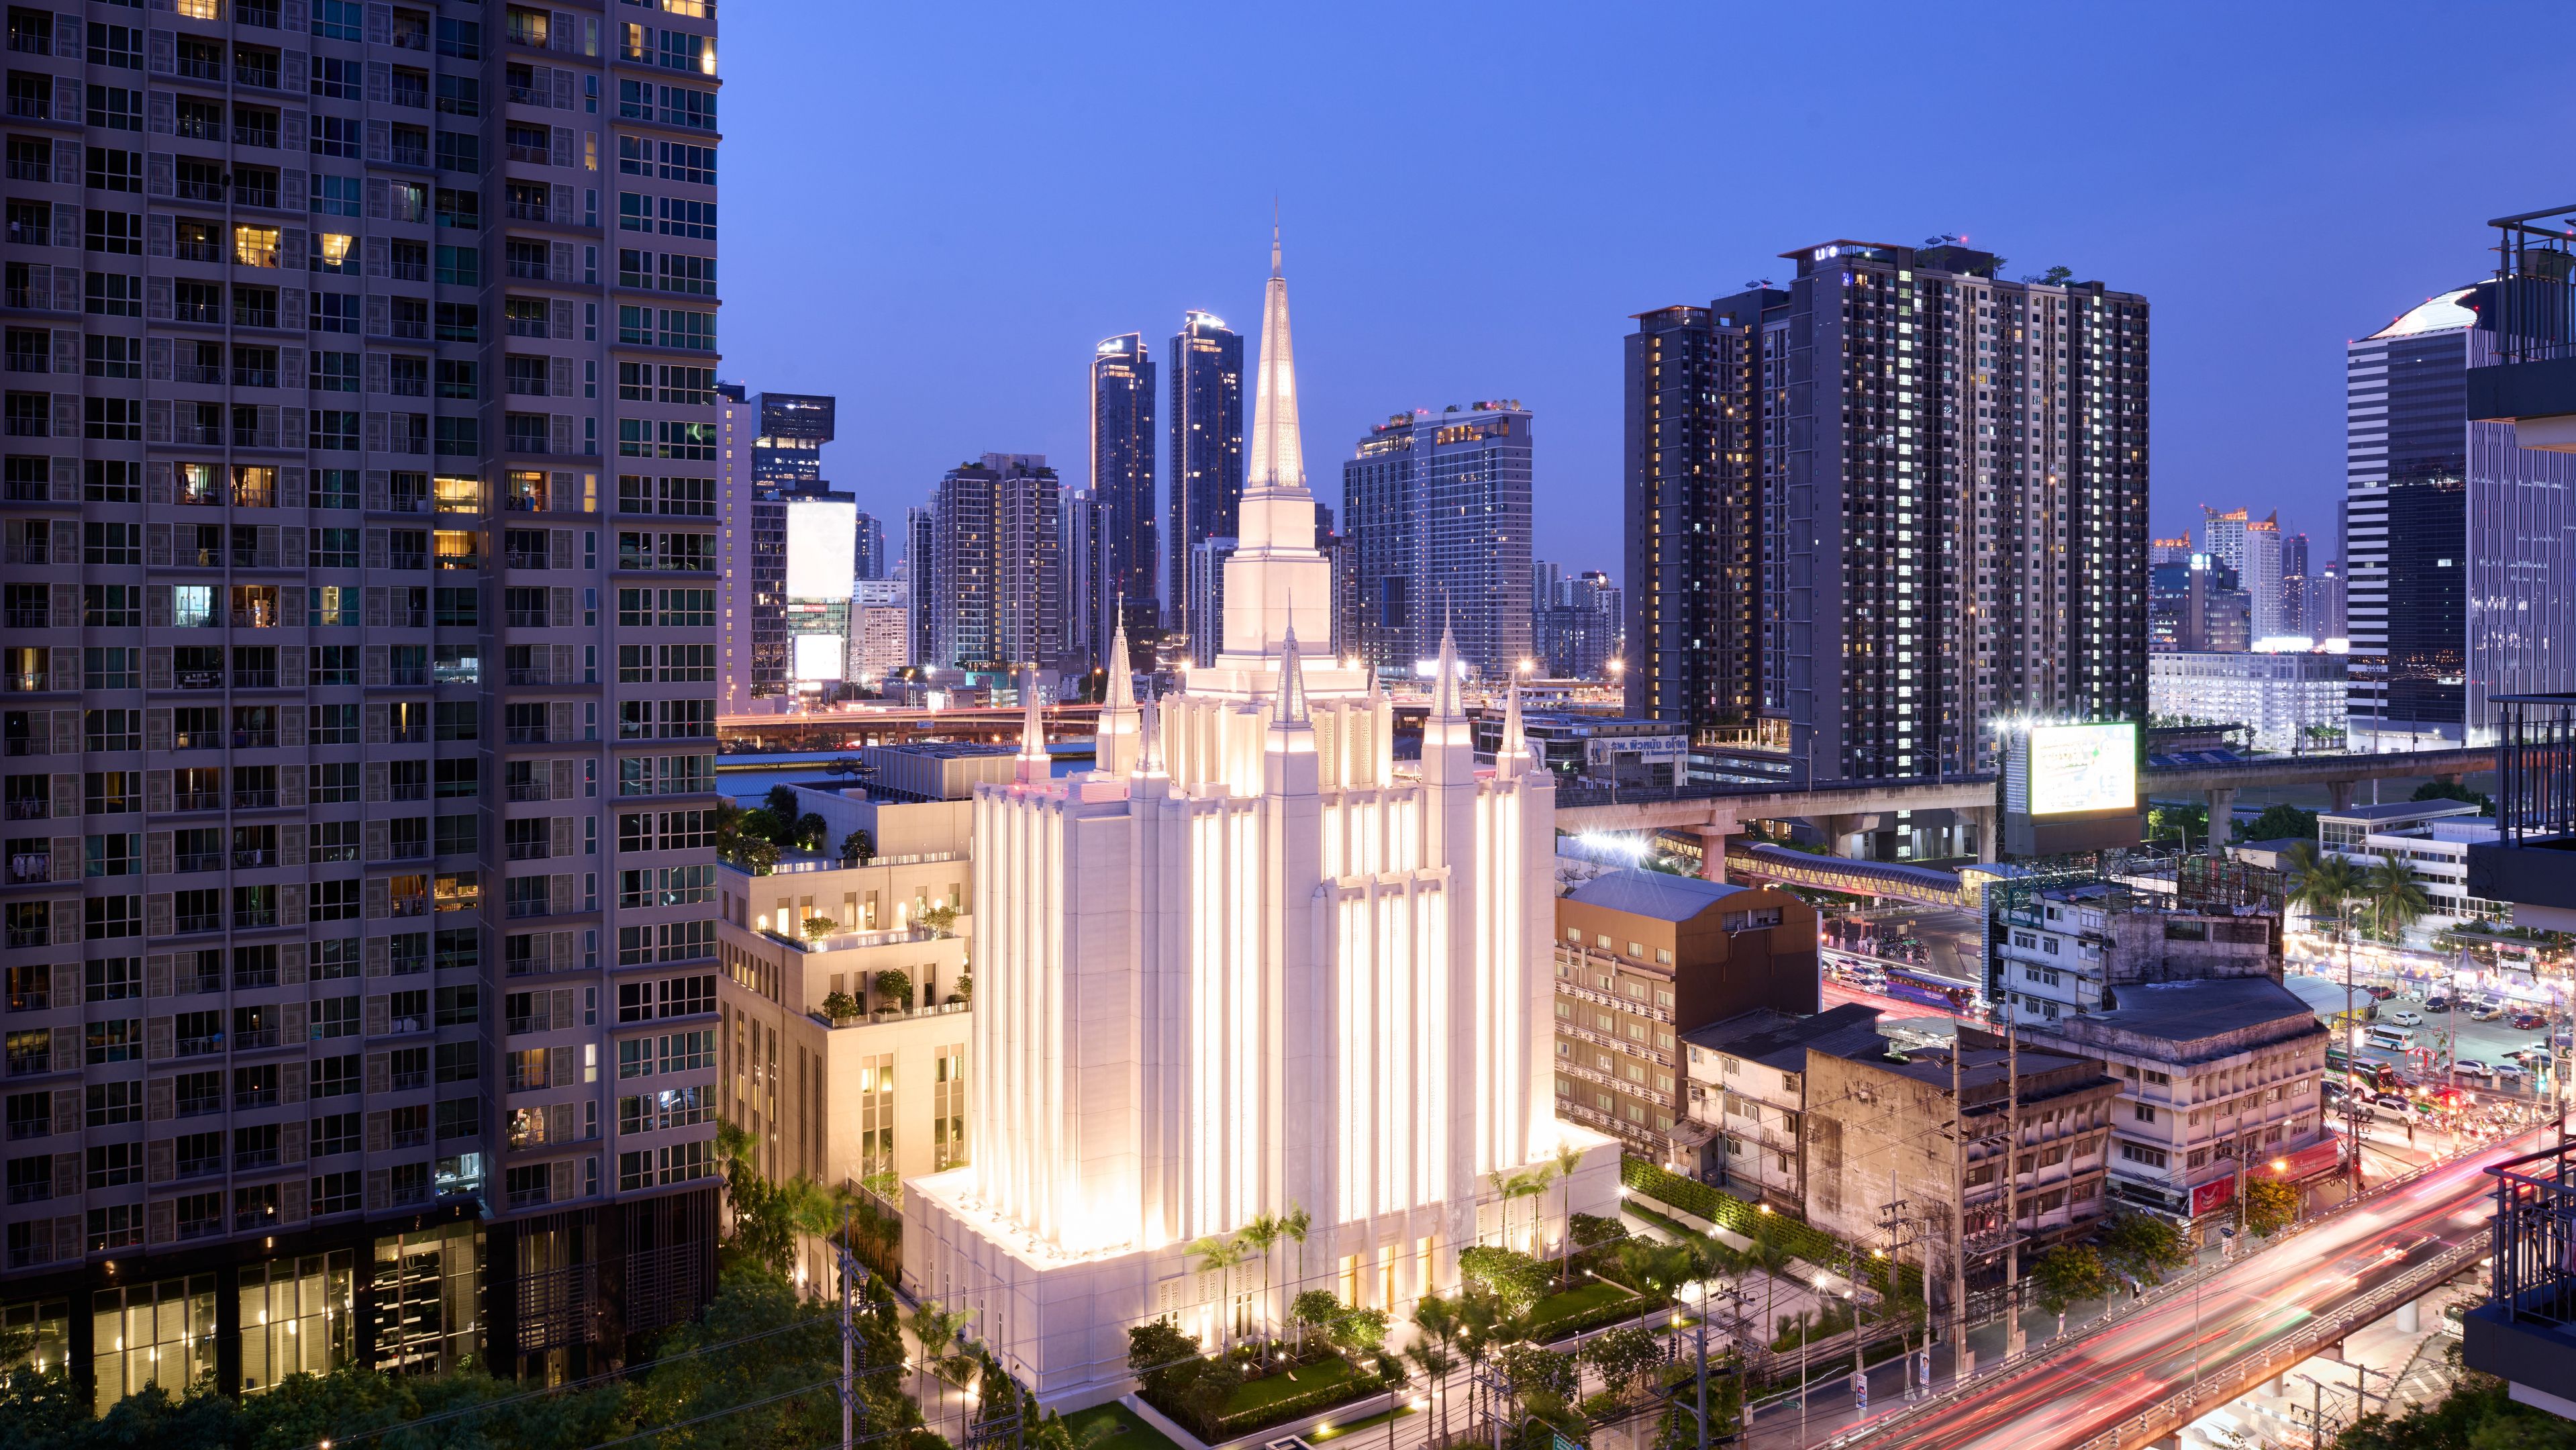 Images of the exterior of the Bangkok Thailand Temple. Images feature the architectural detail of the temple taken from a distance so you see the temple and the surrounding skyscrapers. 